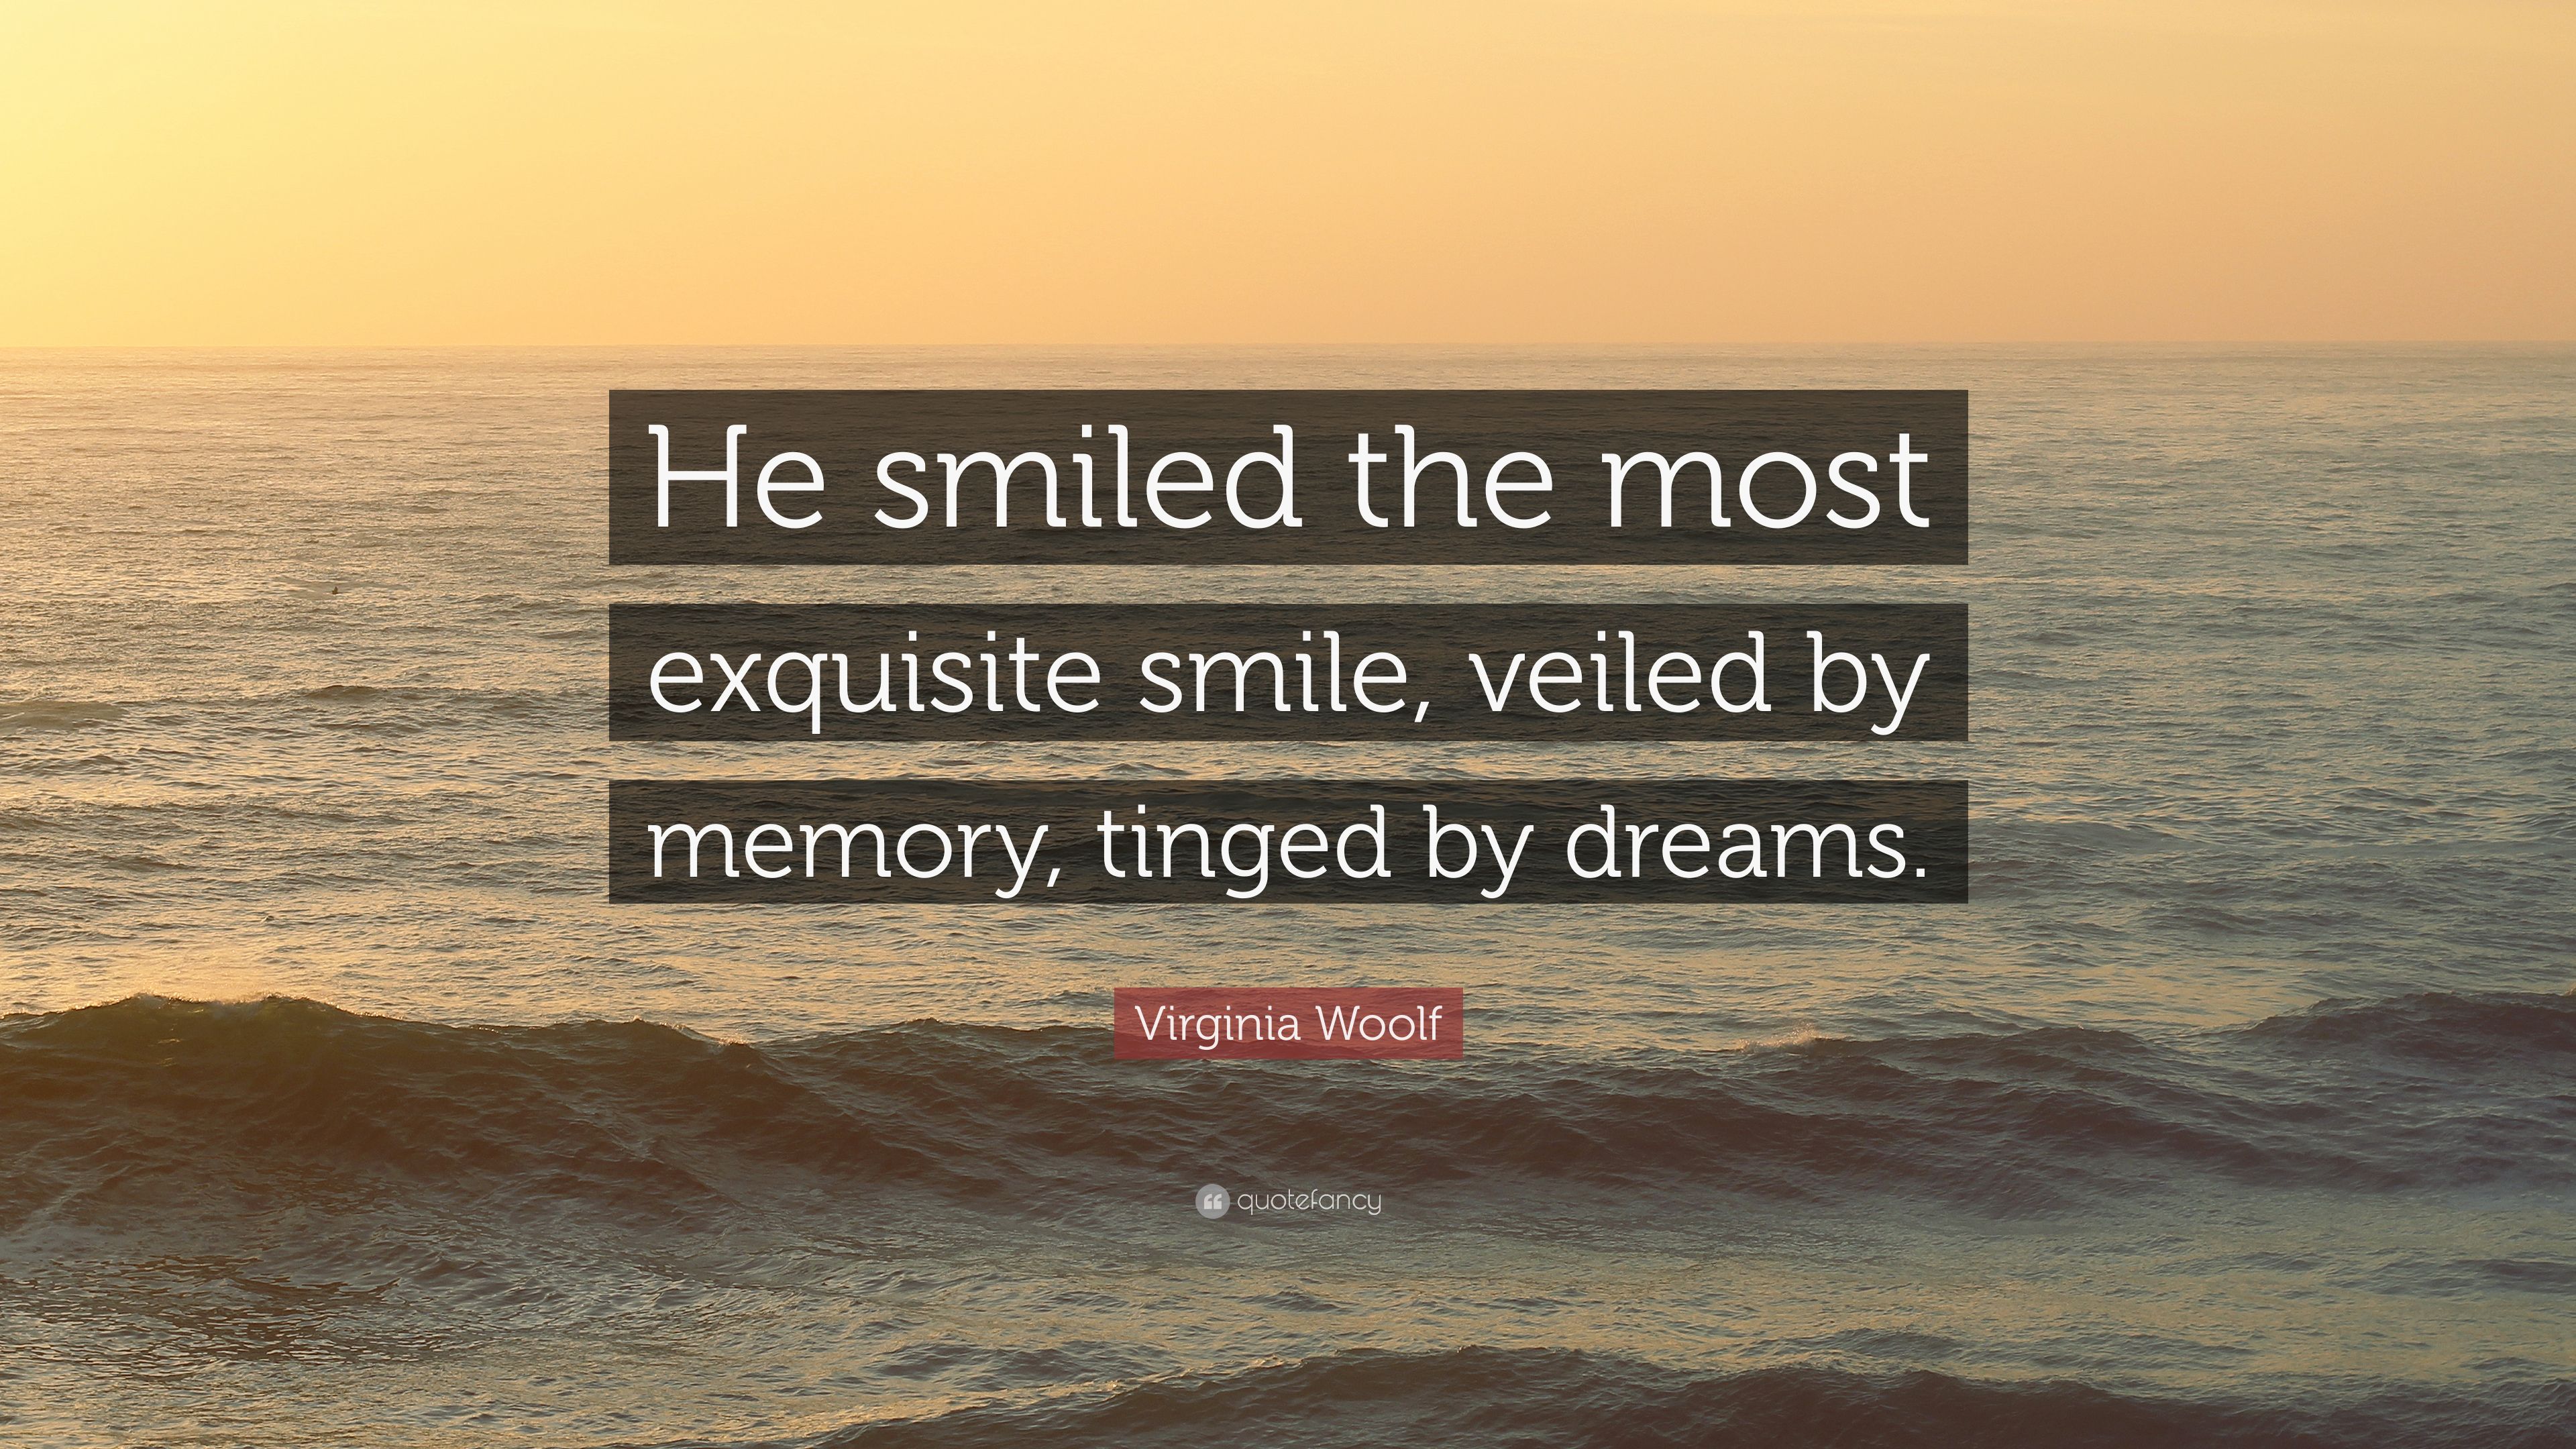 Virginia Woolf Quote: “He smiled the most exquisite smile, veiled